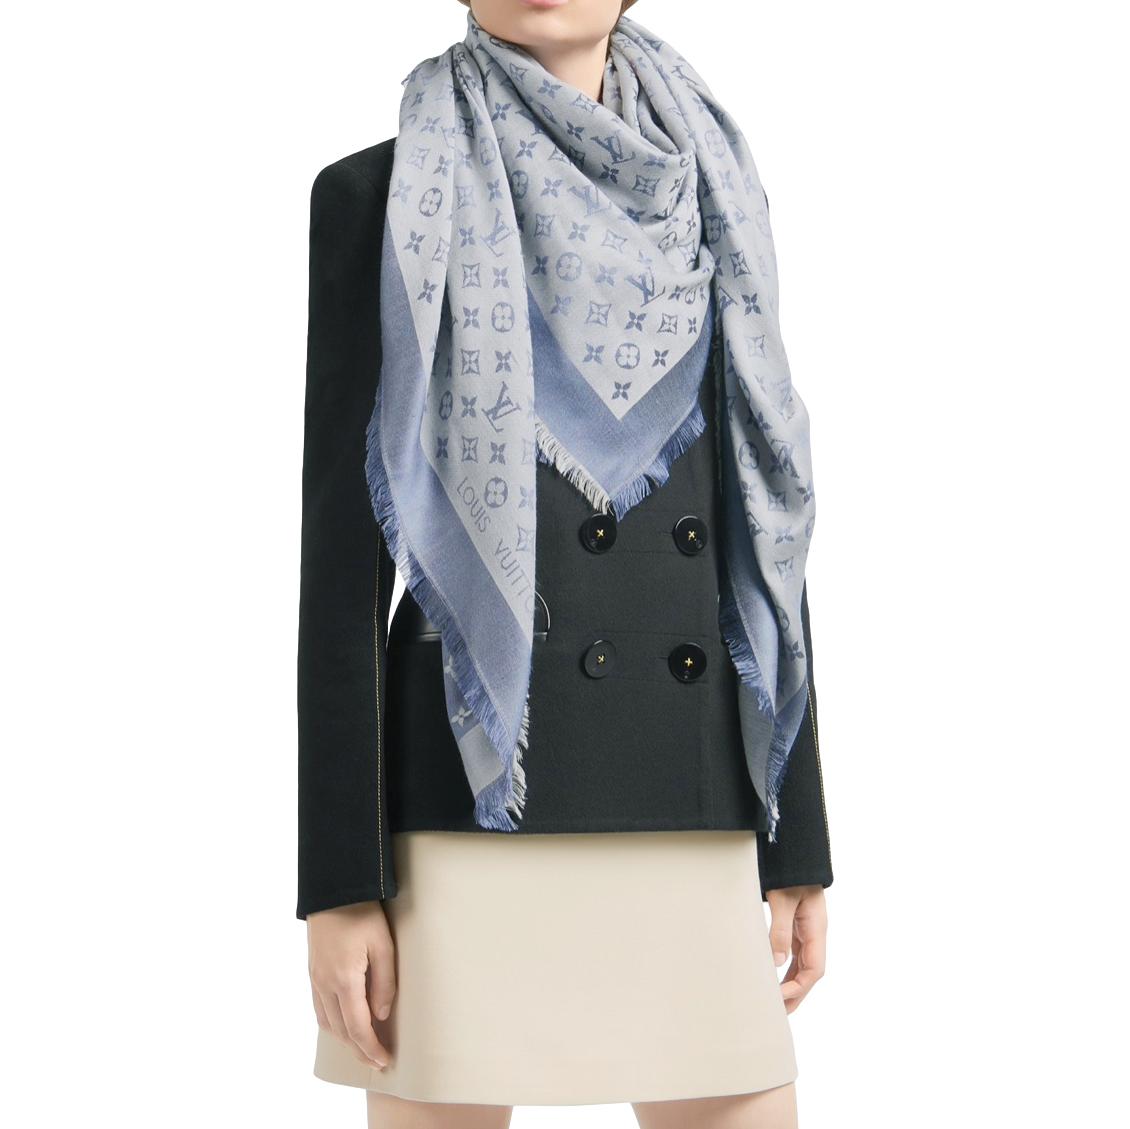 Louis Vuitton Light Blue Monogram Denim Shawl

Ideal for everyday use, this luxuriously soft Monogram Denim shawl is subtle and very feminine. Entirely printed with the Monogram pattern, it features the Louis Vuitton signature

- Luxurious soft silk